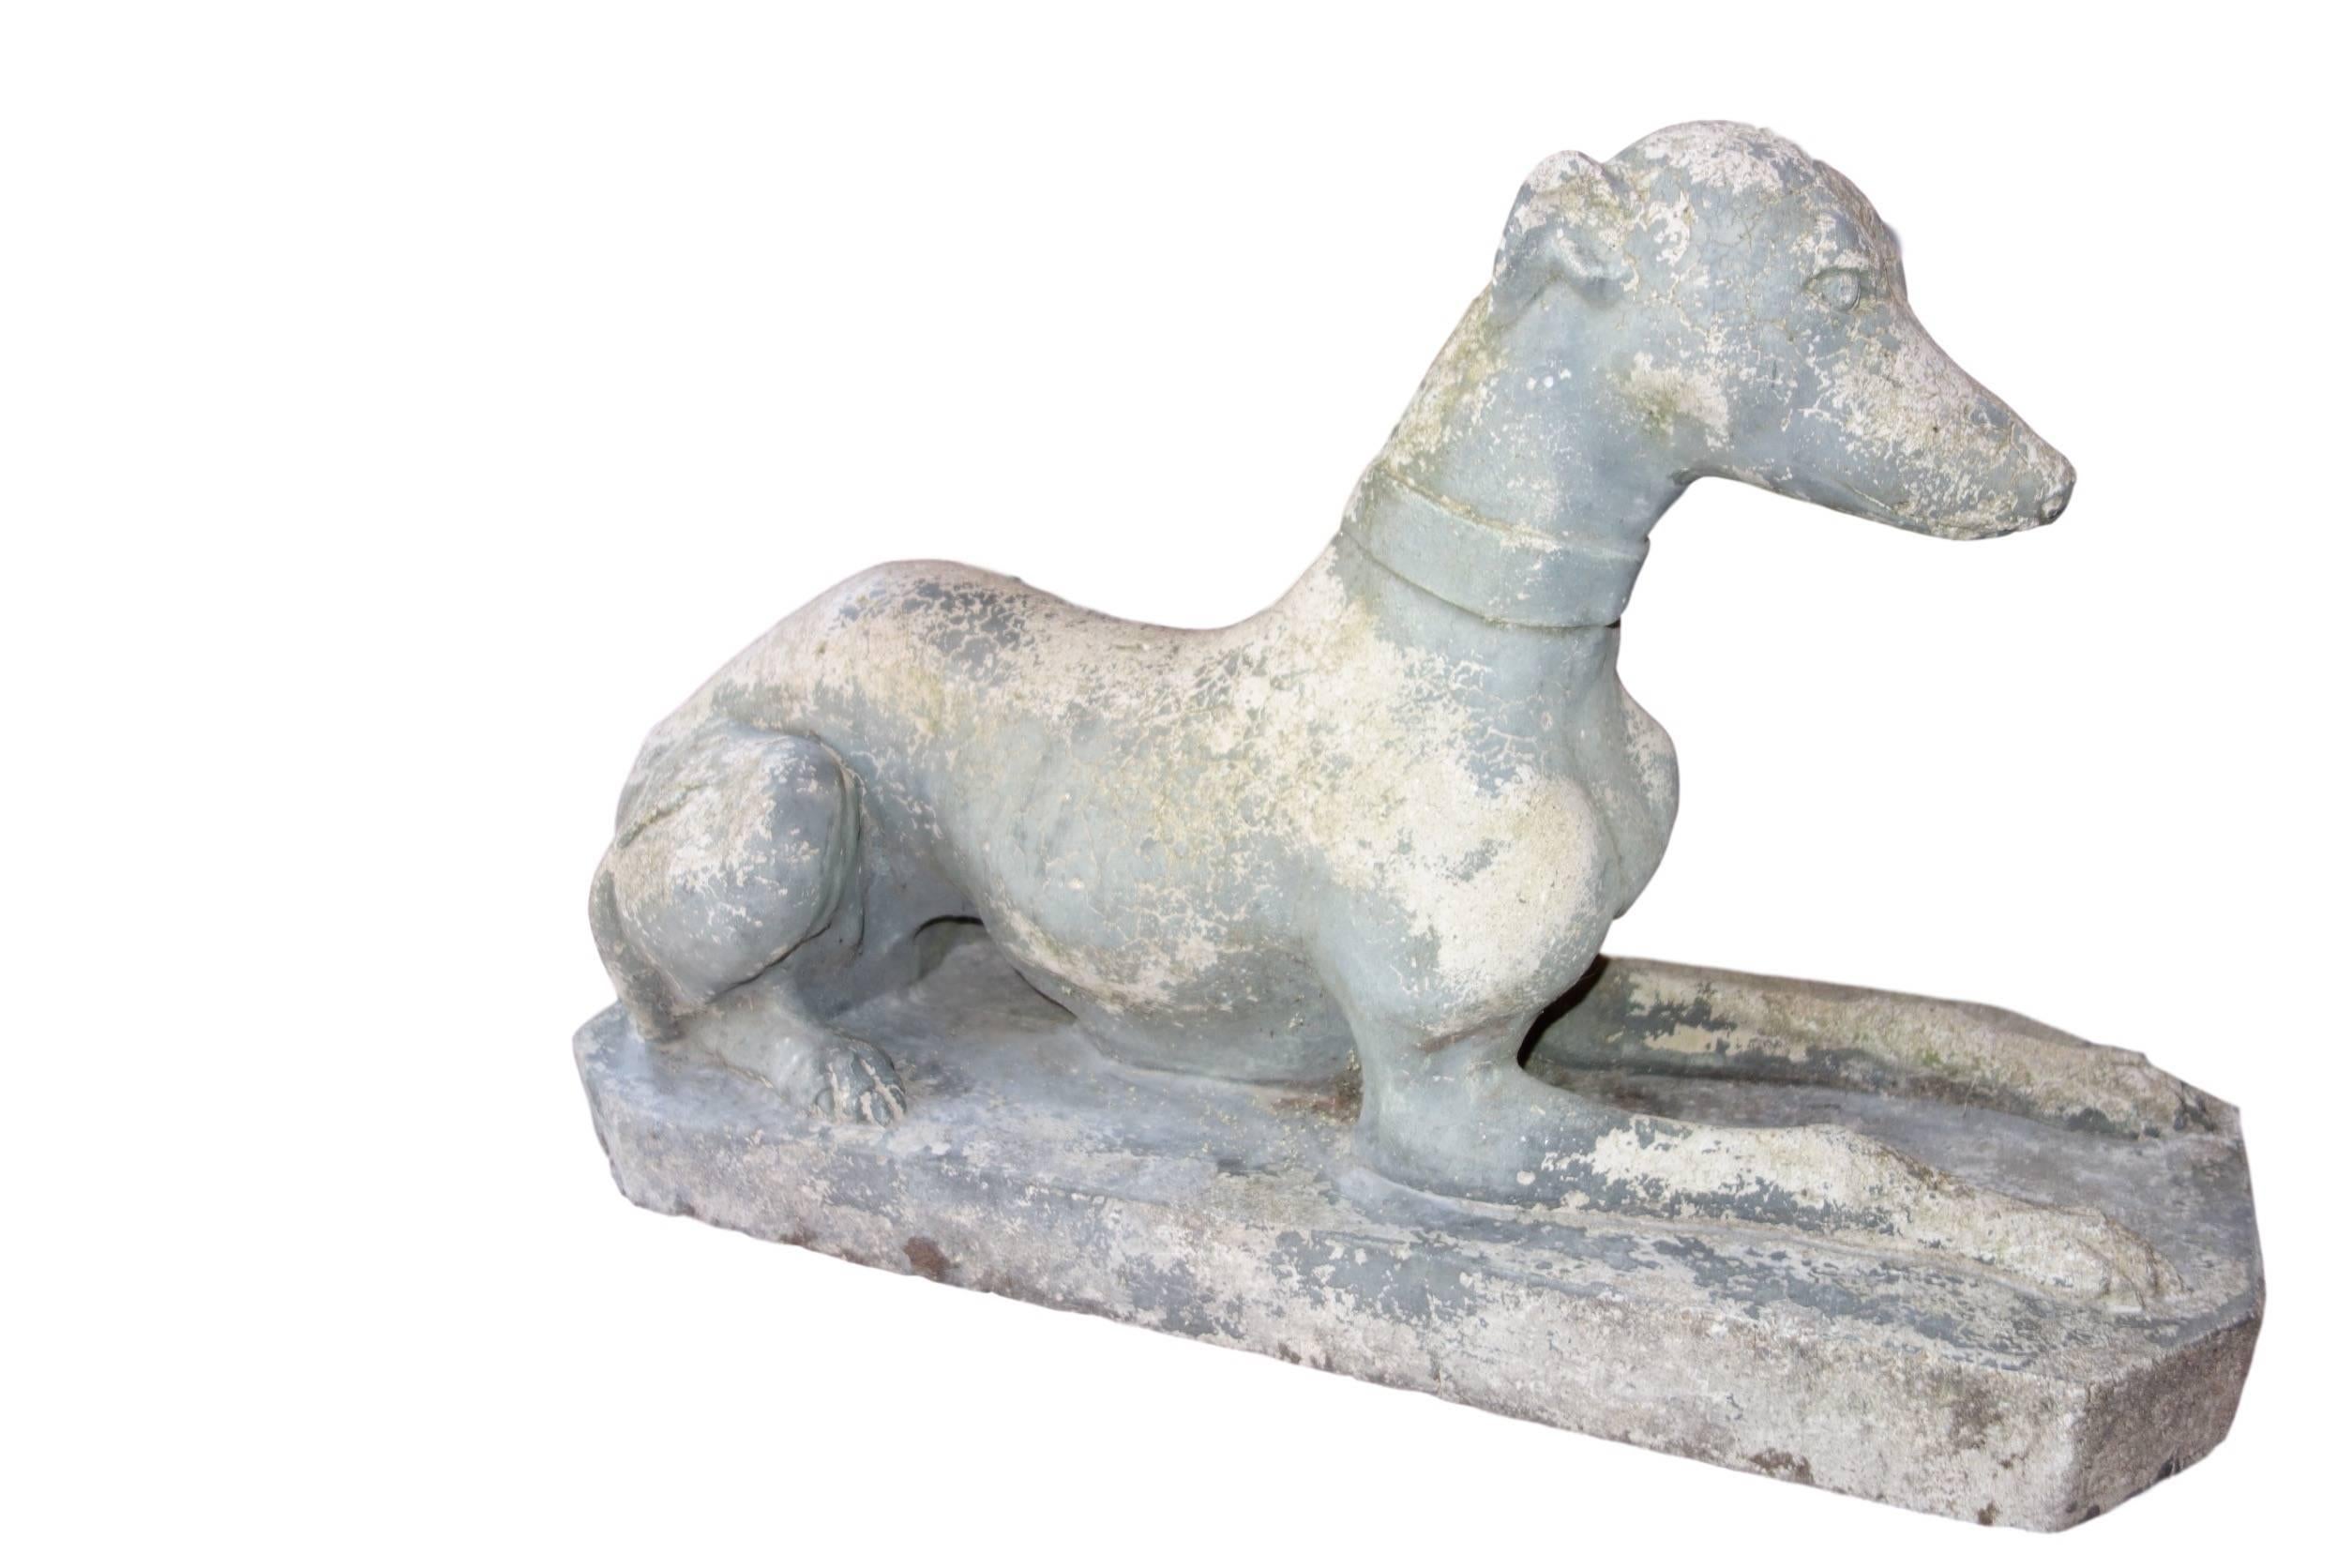 This is a lovely Whippet concrete garden statue from England.